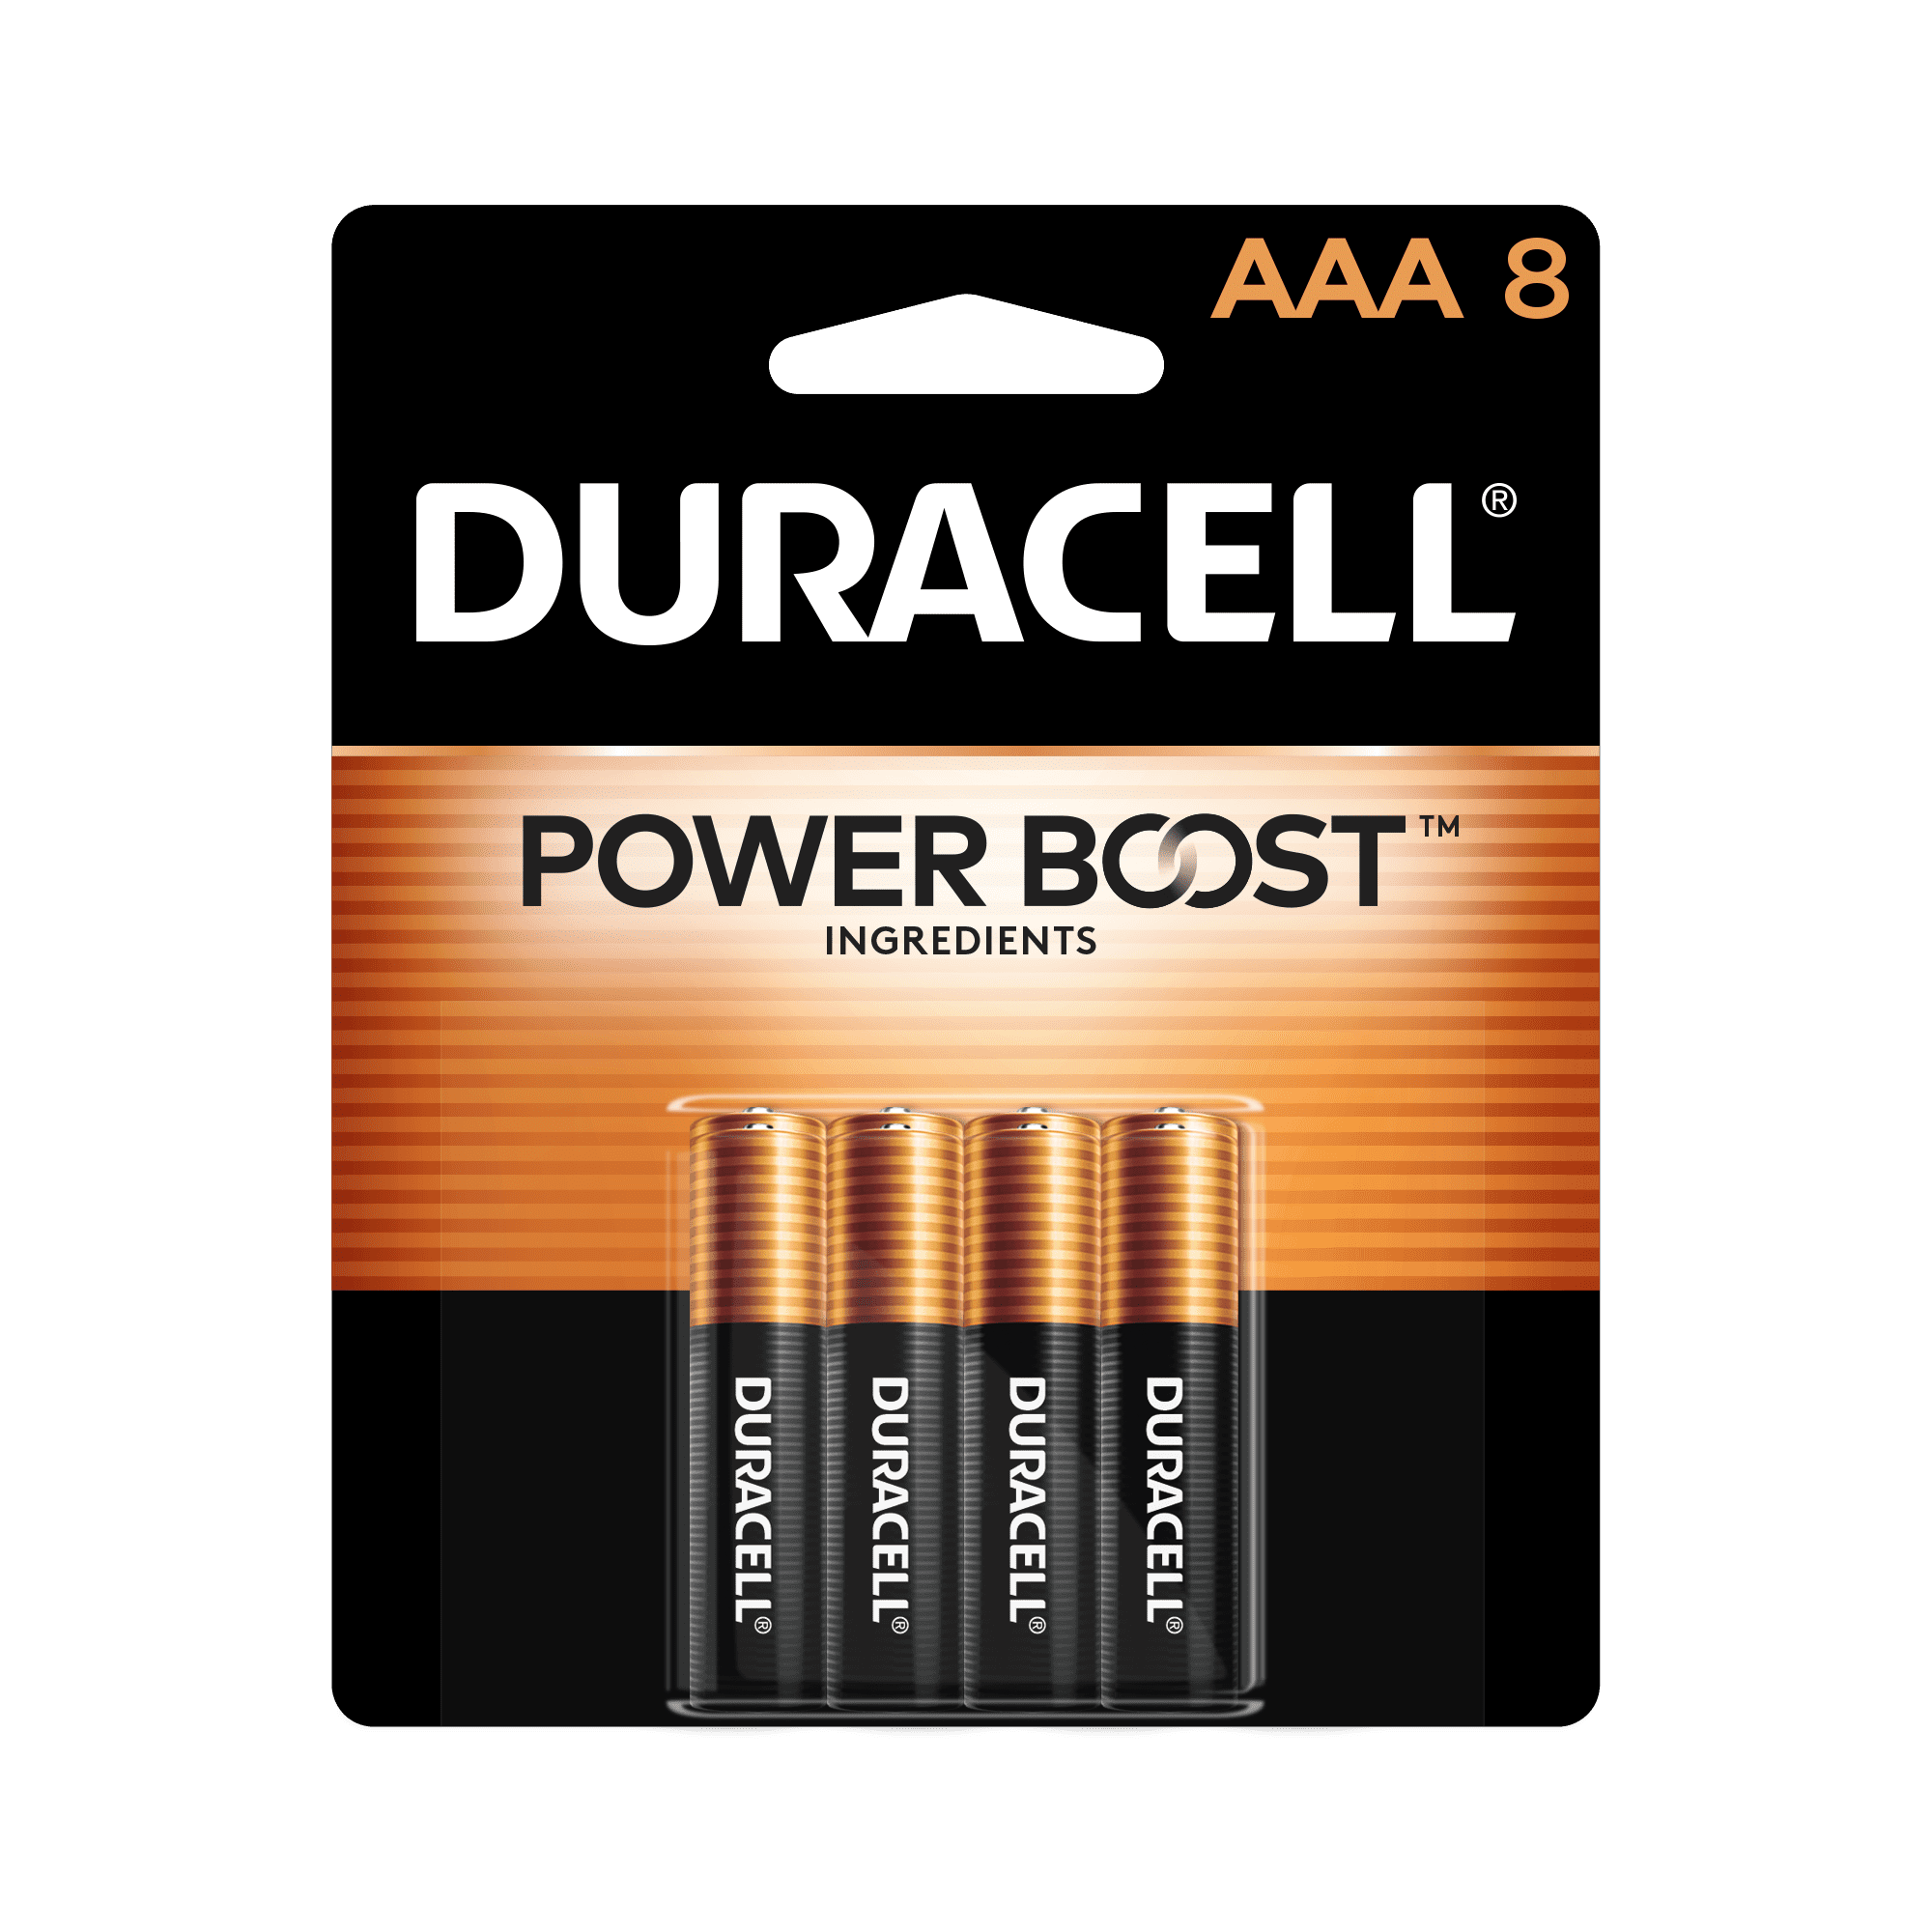 Duracell Coppertop AAA Battery with POWER BOOST, 8 Pack Long-Lasting Batteries